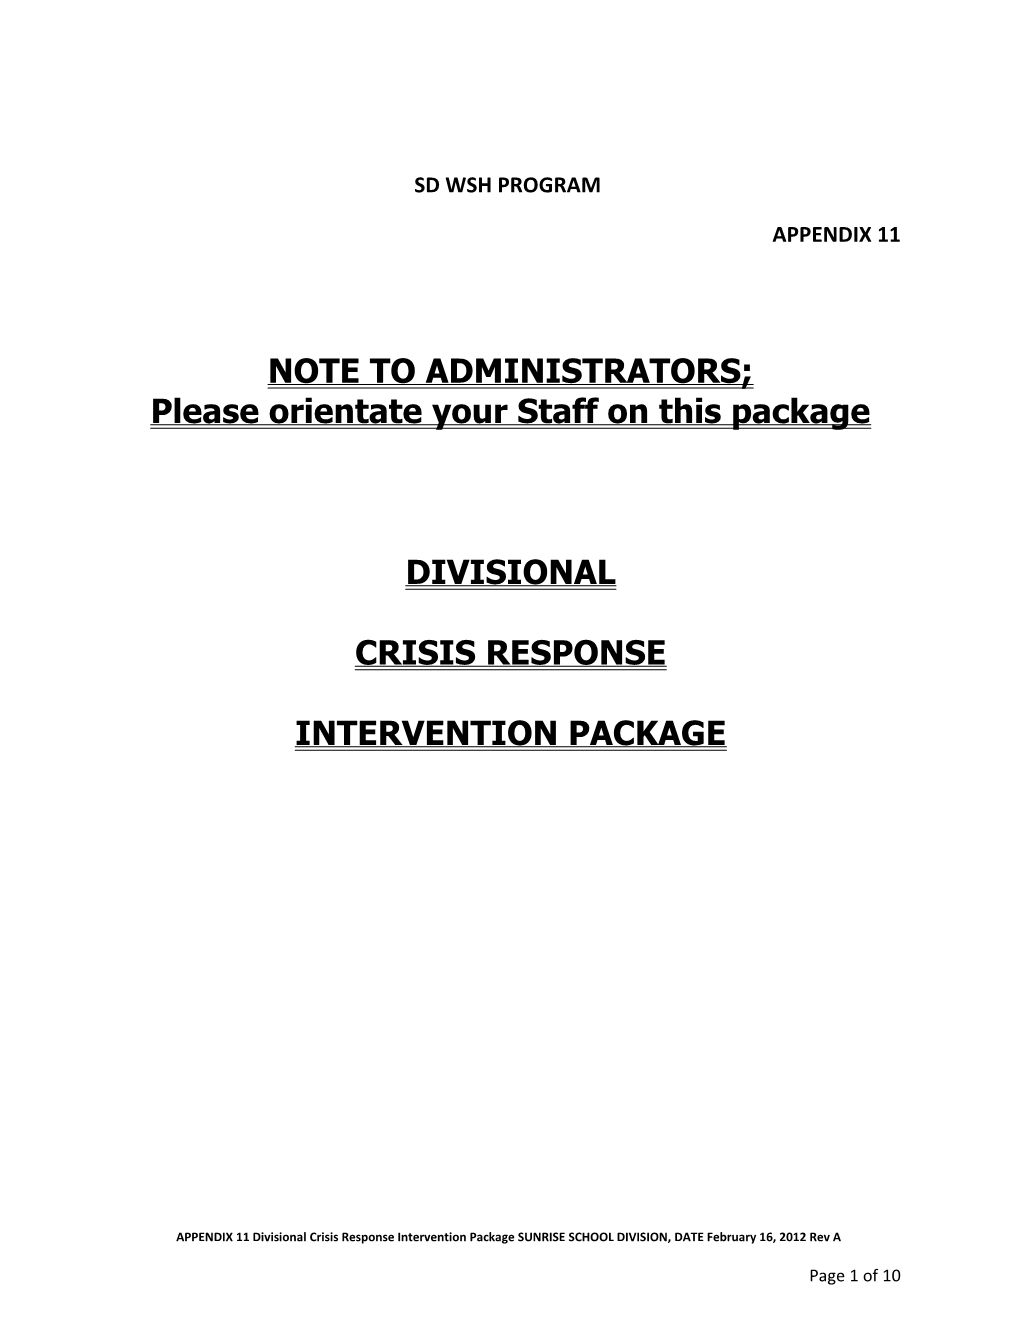 APPENDIX 11 Divisional Crisis Response Intervention Package